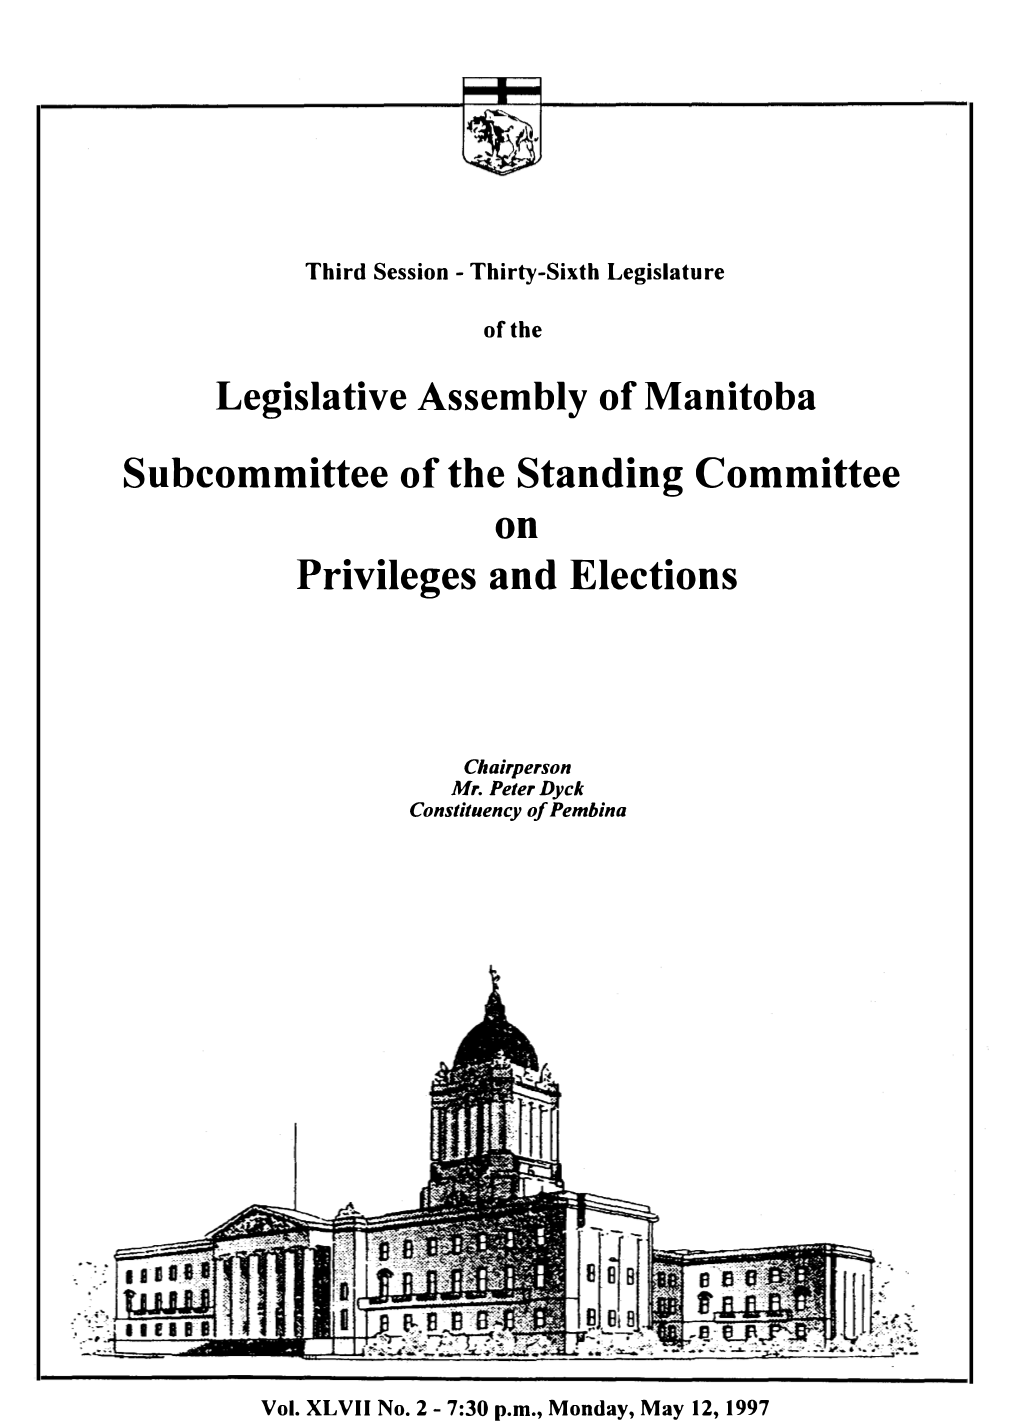 Legislative Assembly of Manitoba Subcommittee of the Standing